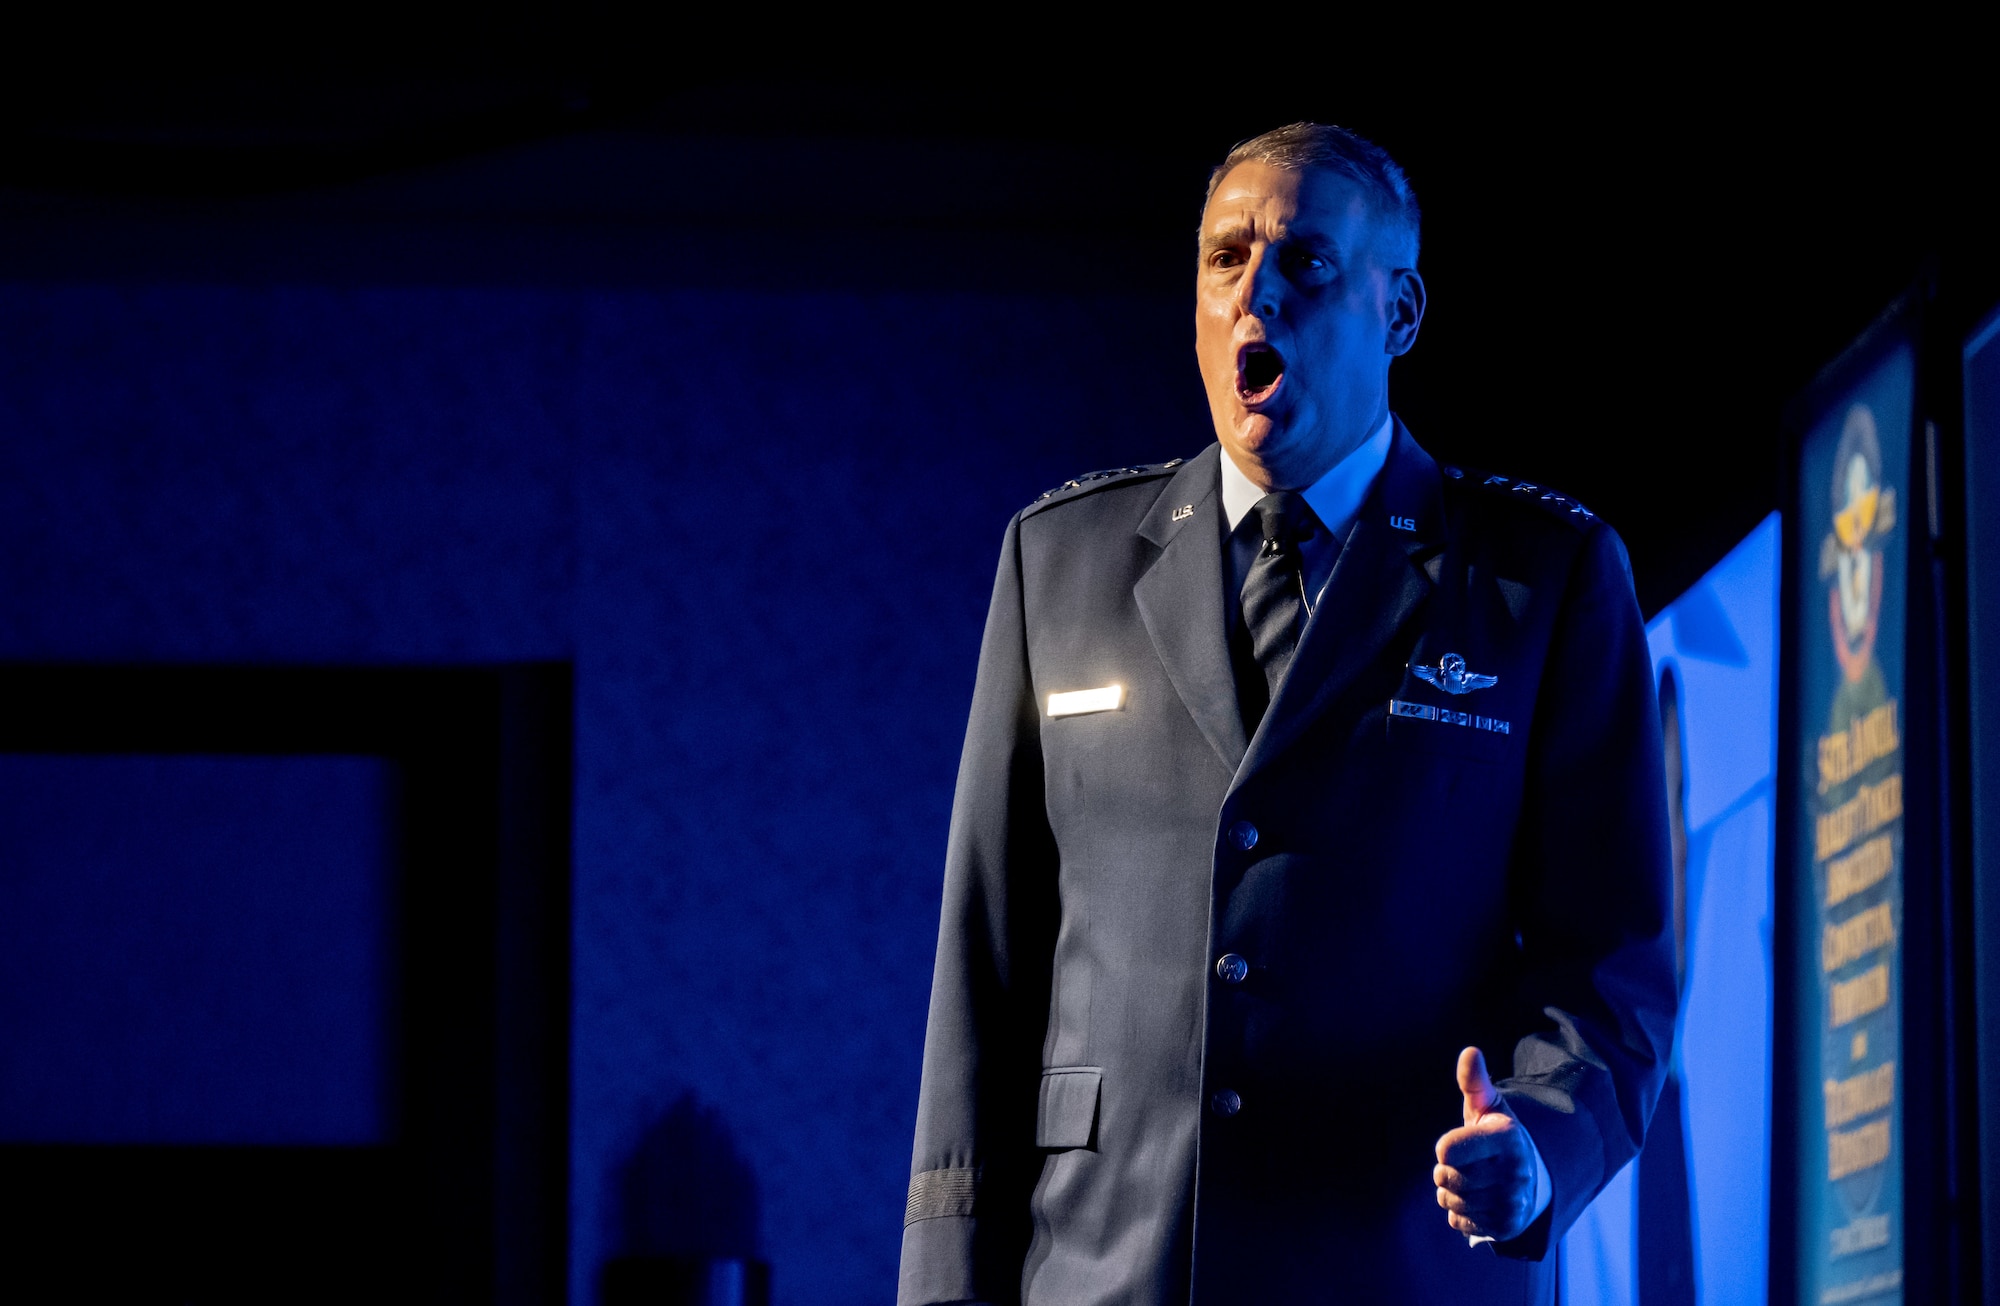 Gen. Mike Minihan, Air Mobility Command commander, delivers his keynote address during the Airlift/Tanker Association Symposium in Denver, Colo., Oct. 27, 2022.  Minihan provided a “state of the Mobility Air Forces” and the path ahead of Mobility Guardian 2023 and a potential near-peer and peer fight.  Additionally, he illustrated the need to leverage a Warrior Heart culture to address the realities of lethality Mobility Air Forces are being asked to bring to the joint fight.  This year’s symposium brought together 1,600 Air Force senior leaders, industry partners, media, partner nations representatives, and Airmen with mobility equities, to include Airmen from Air Force Special Operations Command and Air Force Education Command. The open environment drove discussion on issues and challenges facing America and the Air Mobility community at large, with a specific focus on the Indo-Pacific area of responsibility and the mobility joint force requirements that will yield safety and security for the nation. (U.S. Air Force photo by Master Sgt. Jodi Martinez)